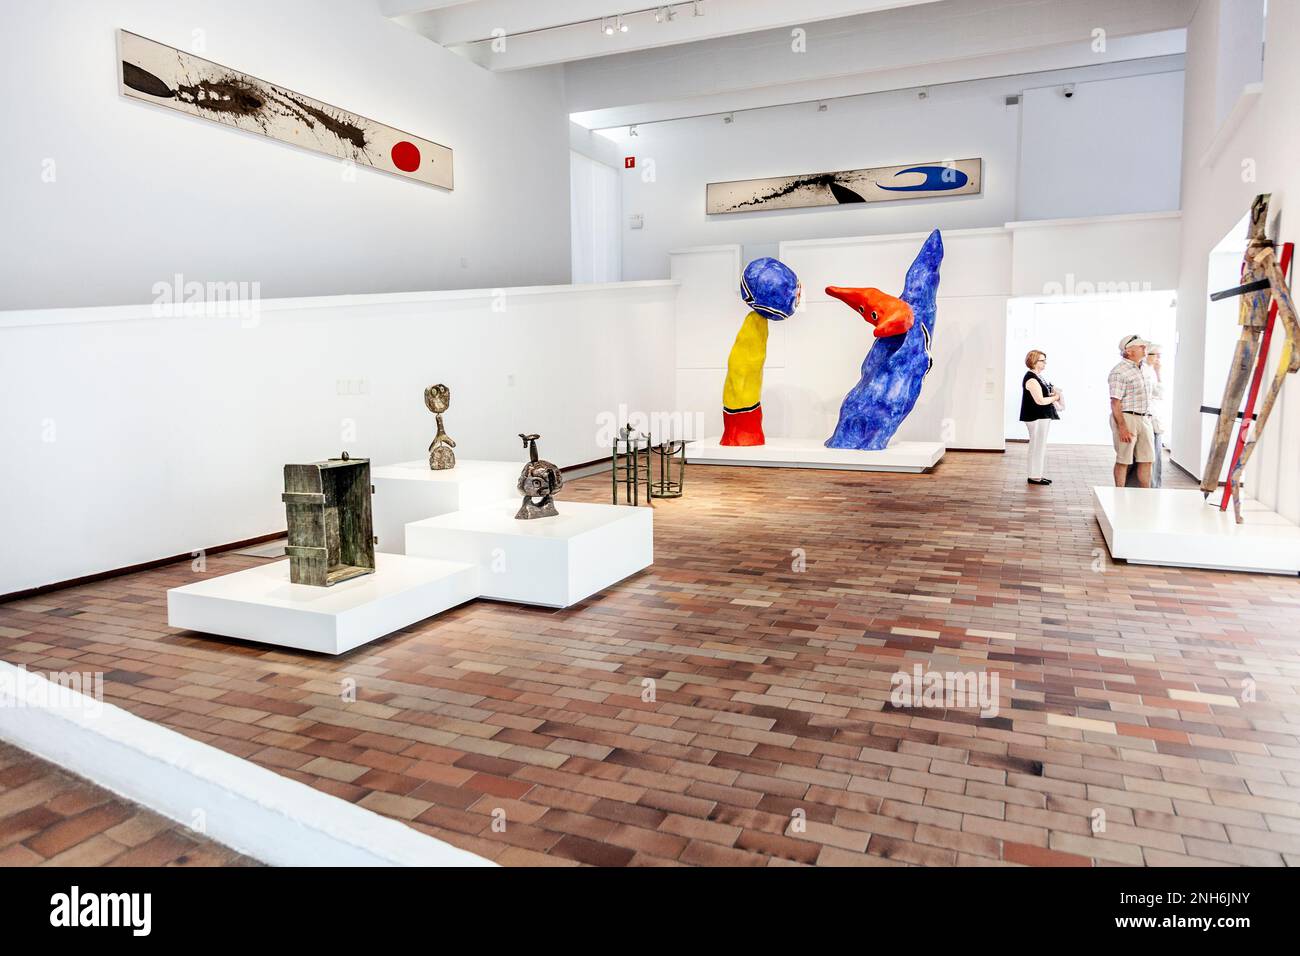 Interior of the Joan Miró Foundation on the Montjuic hill in Barcelona, Spain Stock Photo